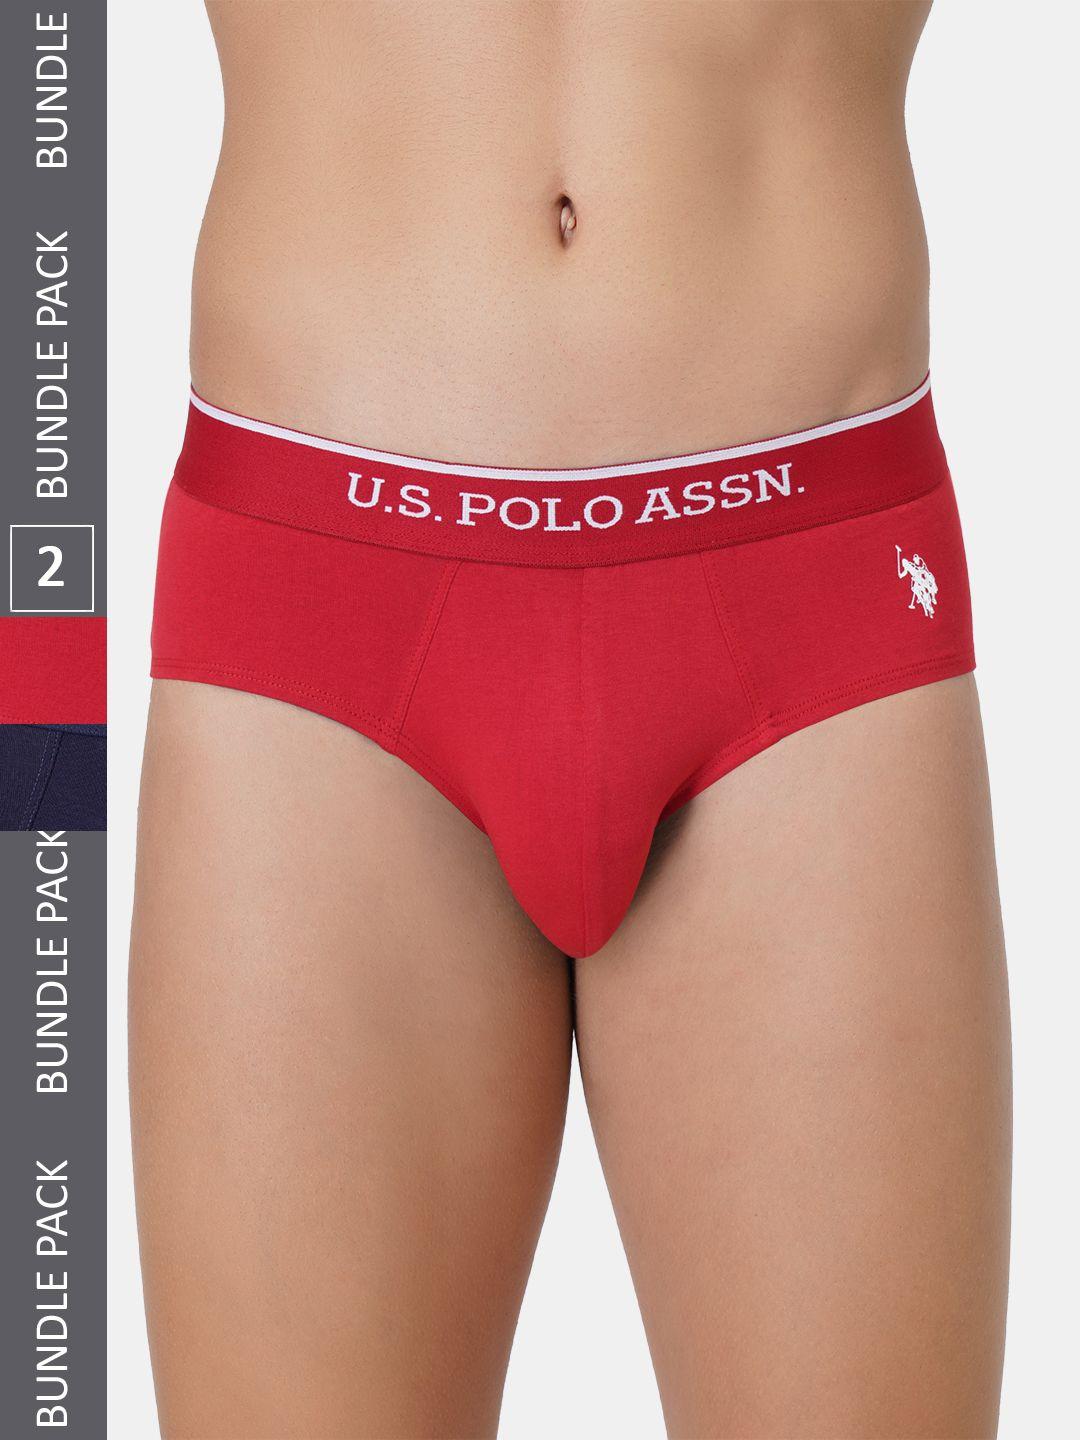 u.s.-polo-assn.-men-pack-of-2-mid-rise-basic-brief